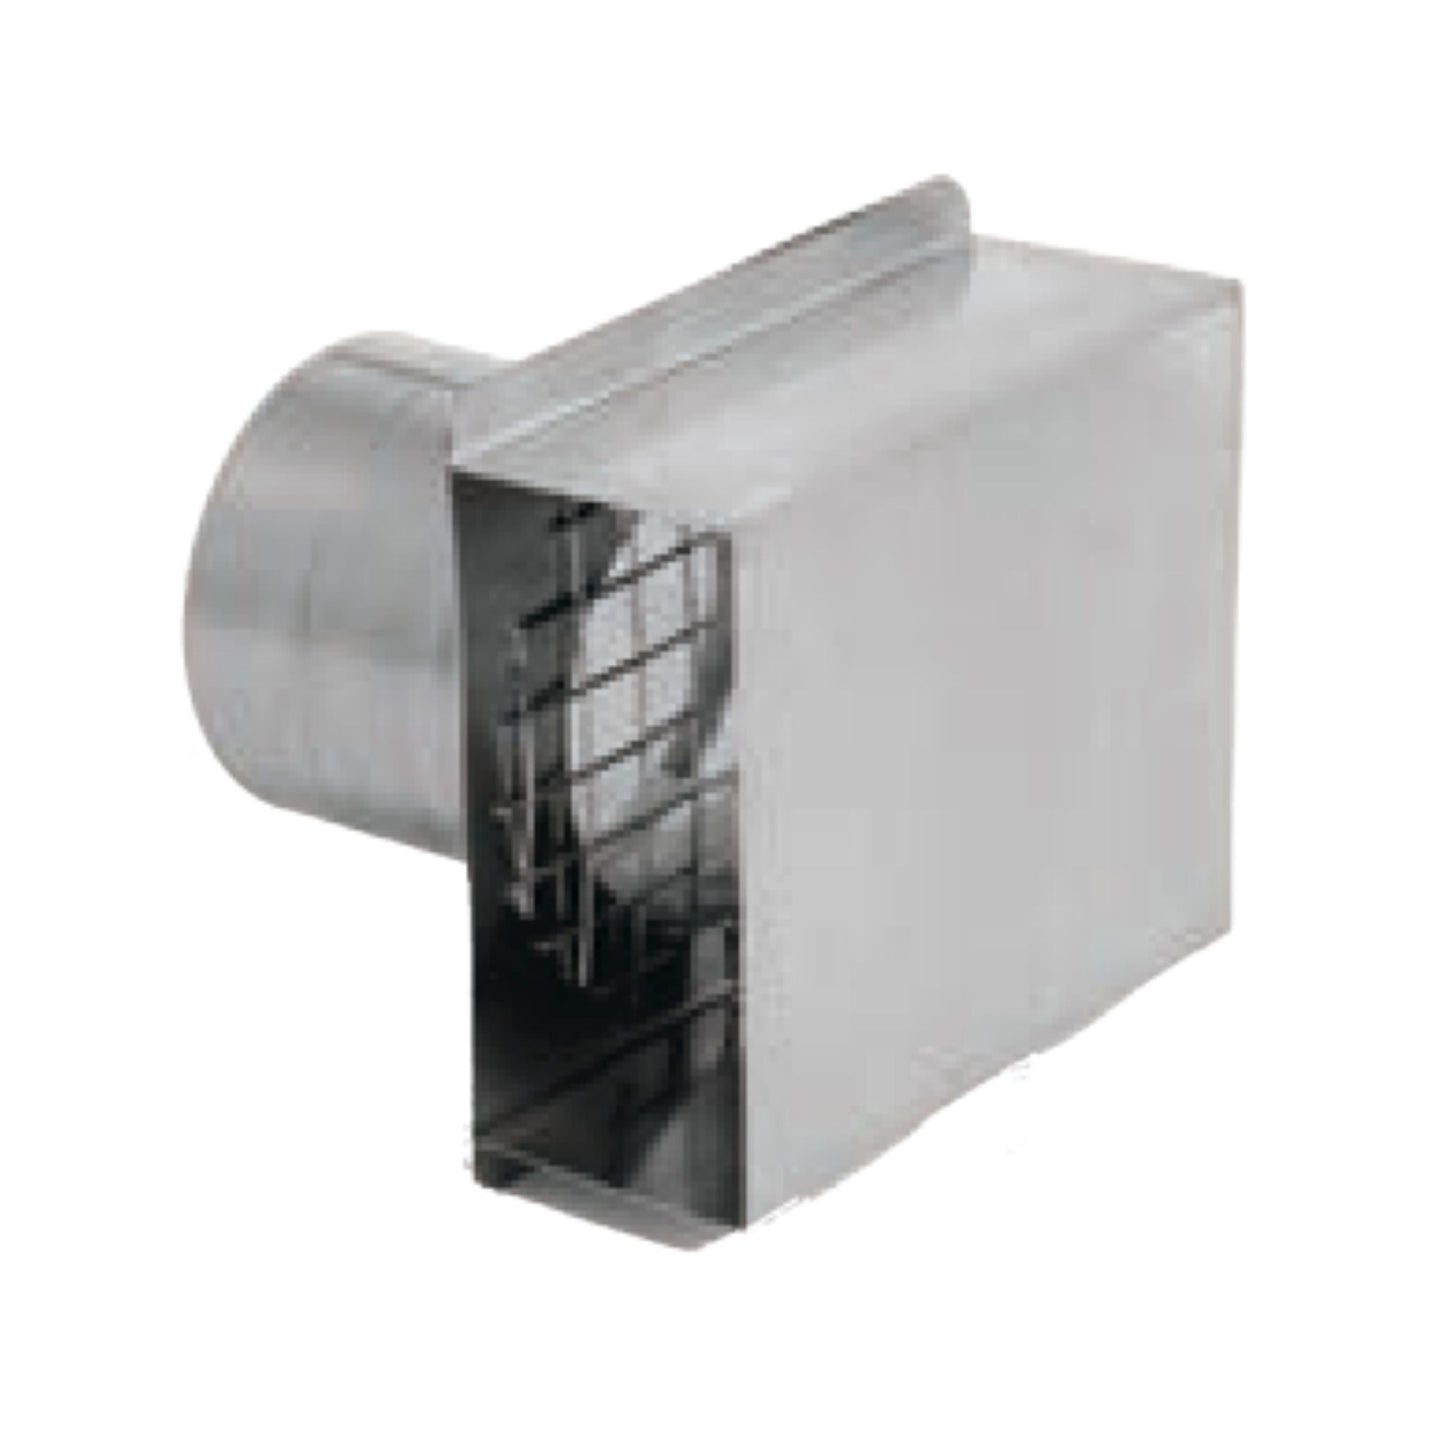 DuraVent FasNSeal 4" 316L Stainless Steel Termination Box